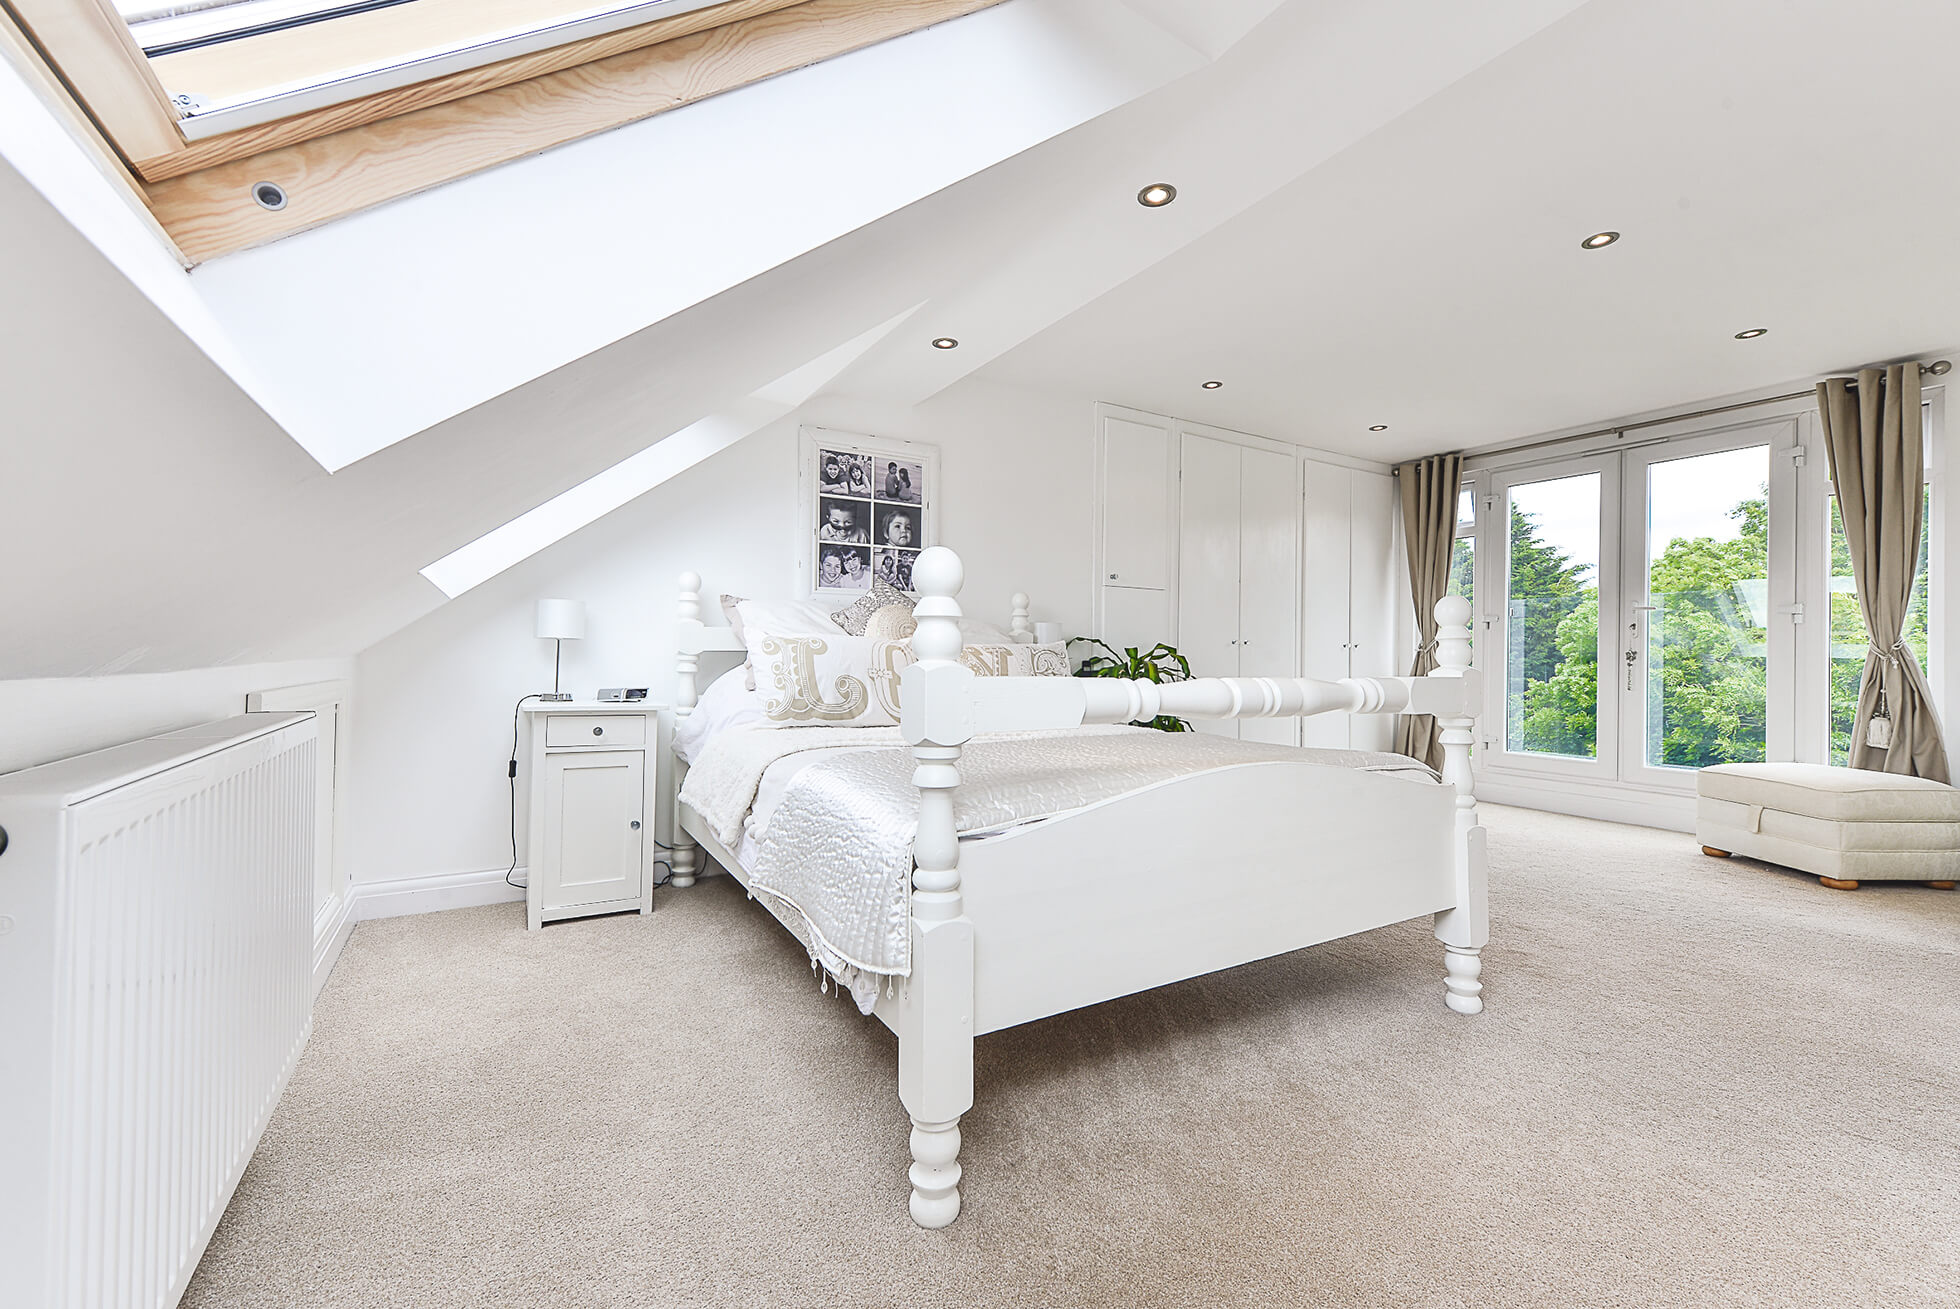 Do you have a question about converting your Loft in Bricket Wood? Here are the most popular questions asked by our clients.